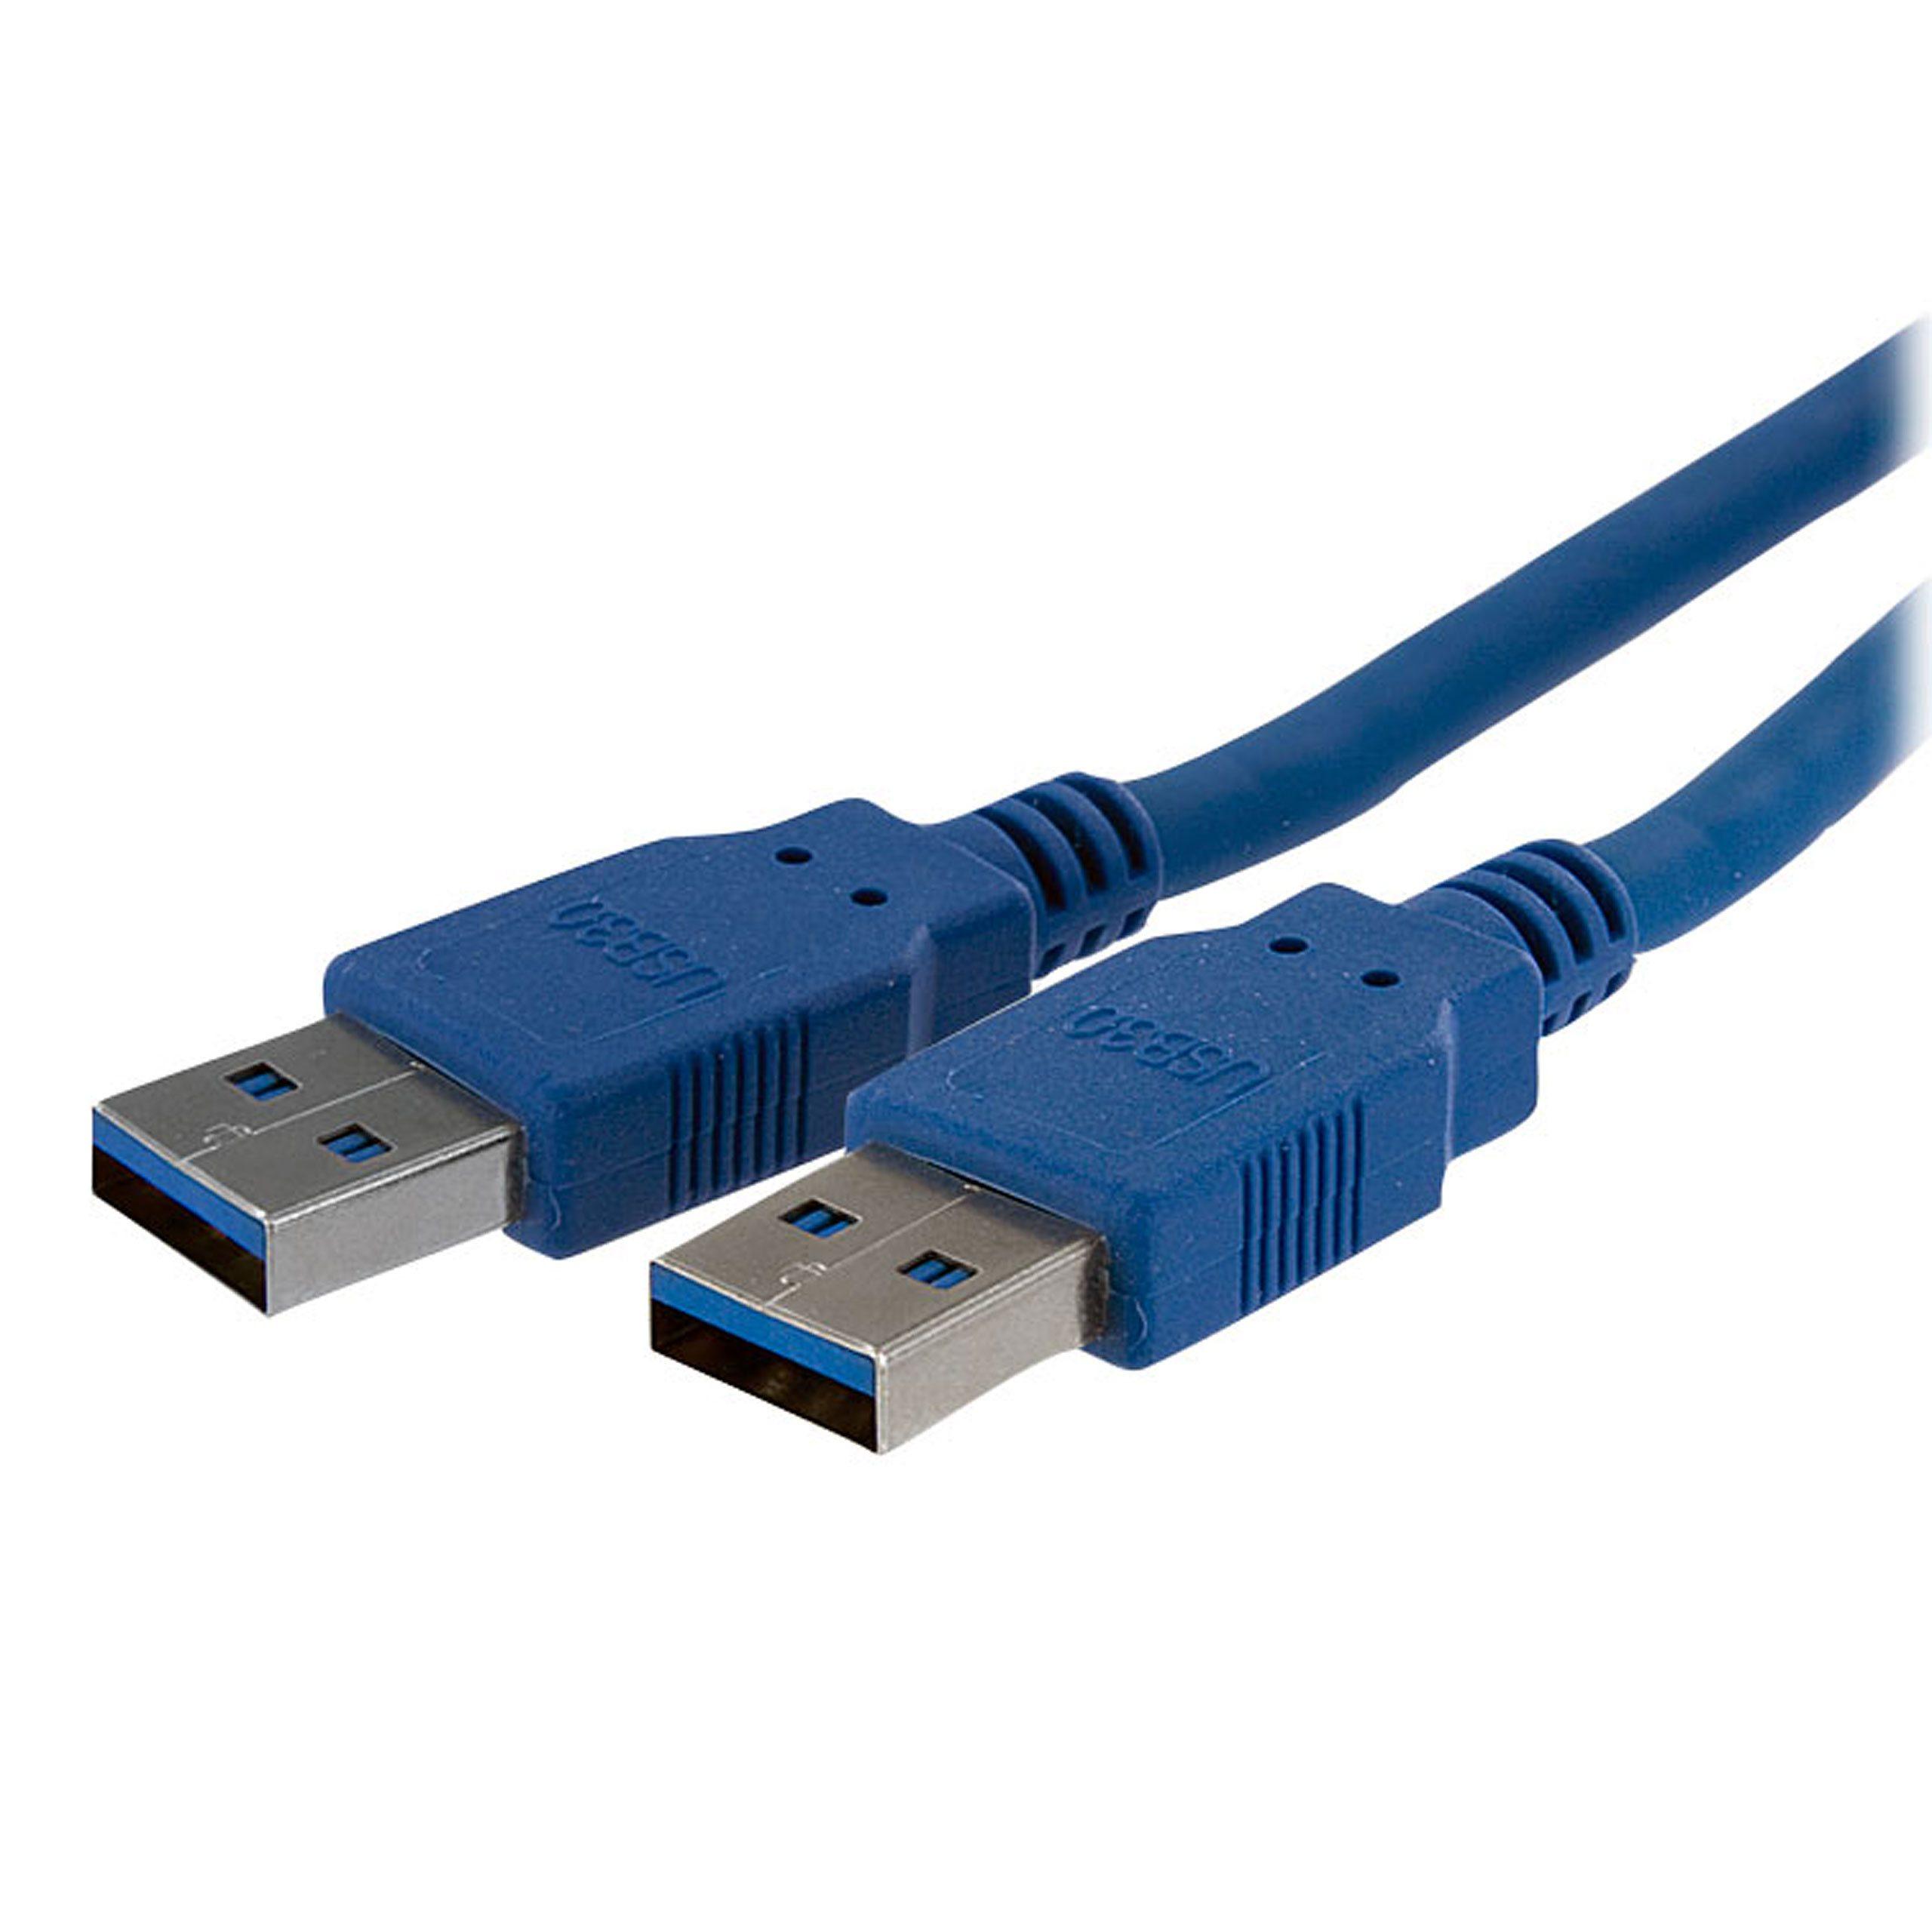 Startech.com 6 Ft 2m Superspeed USB 3.0 Cable A to A